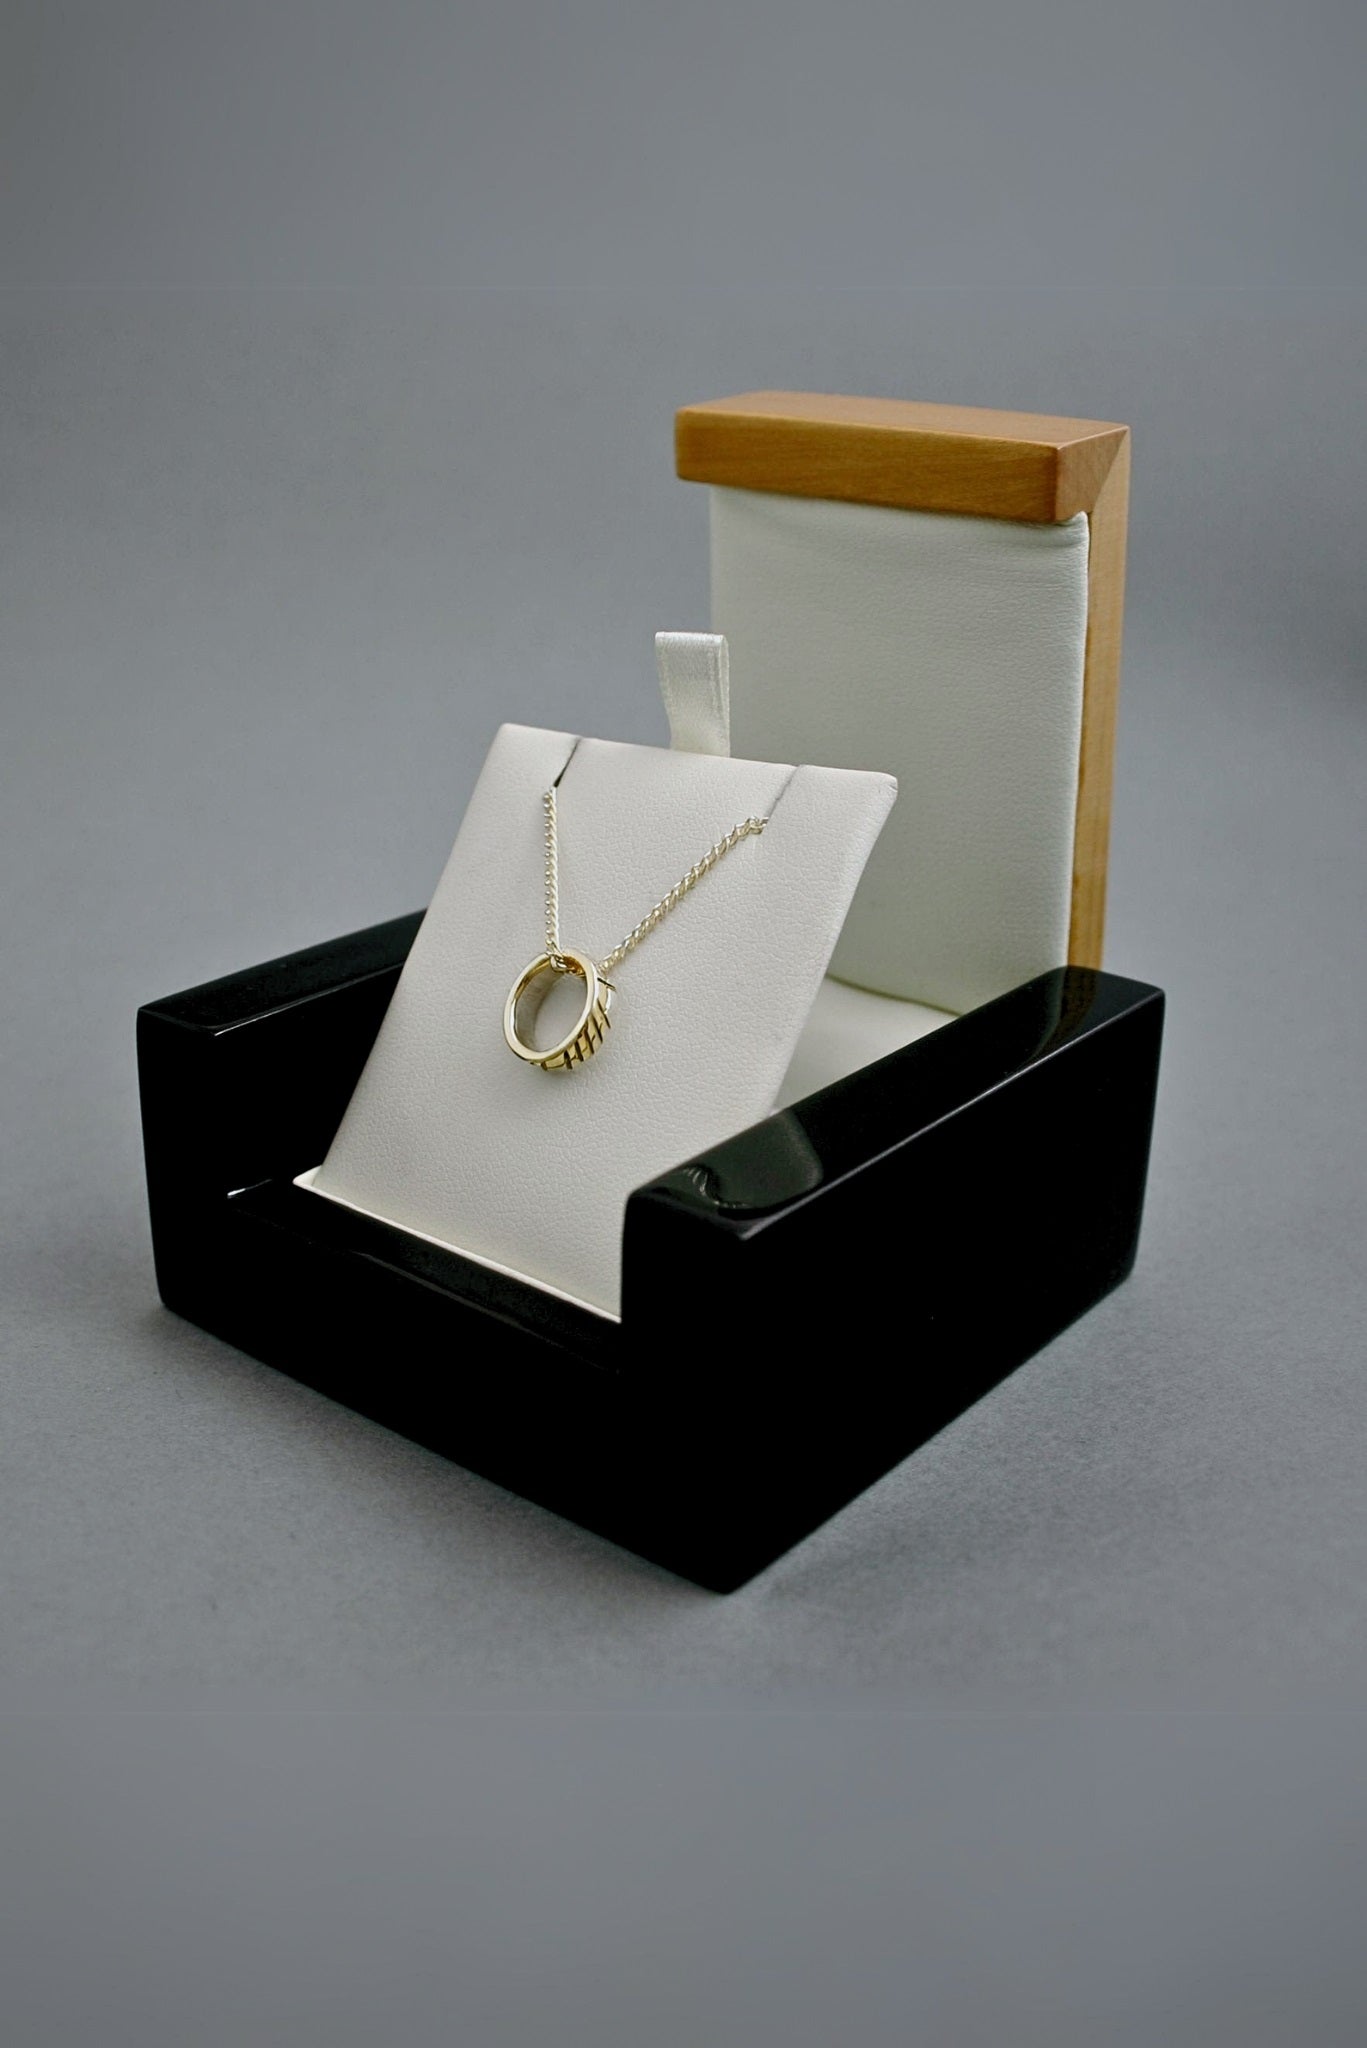 Gra Ogham Necklace in gold in box